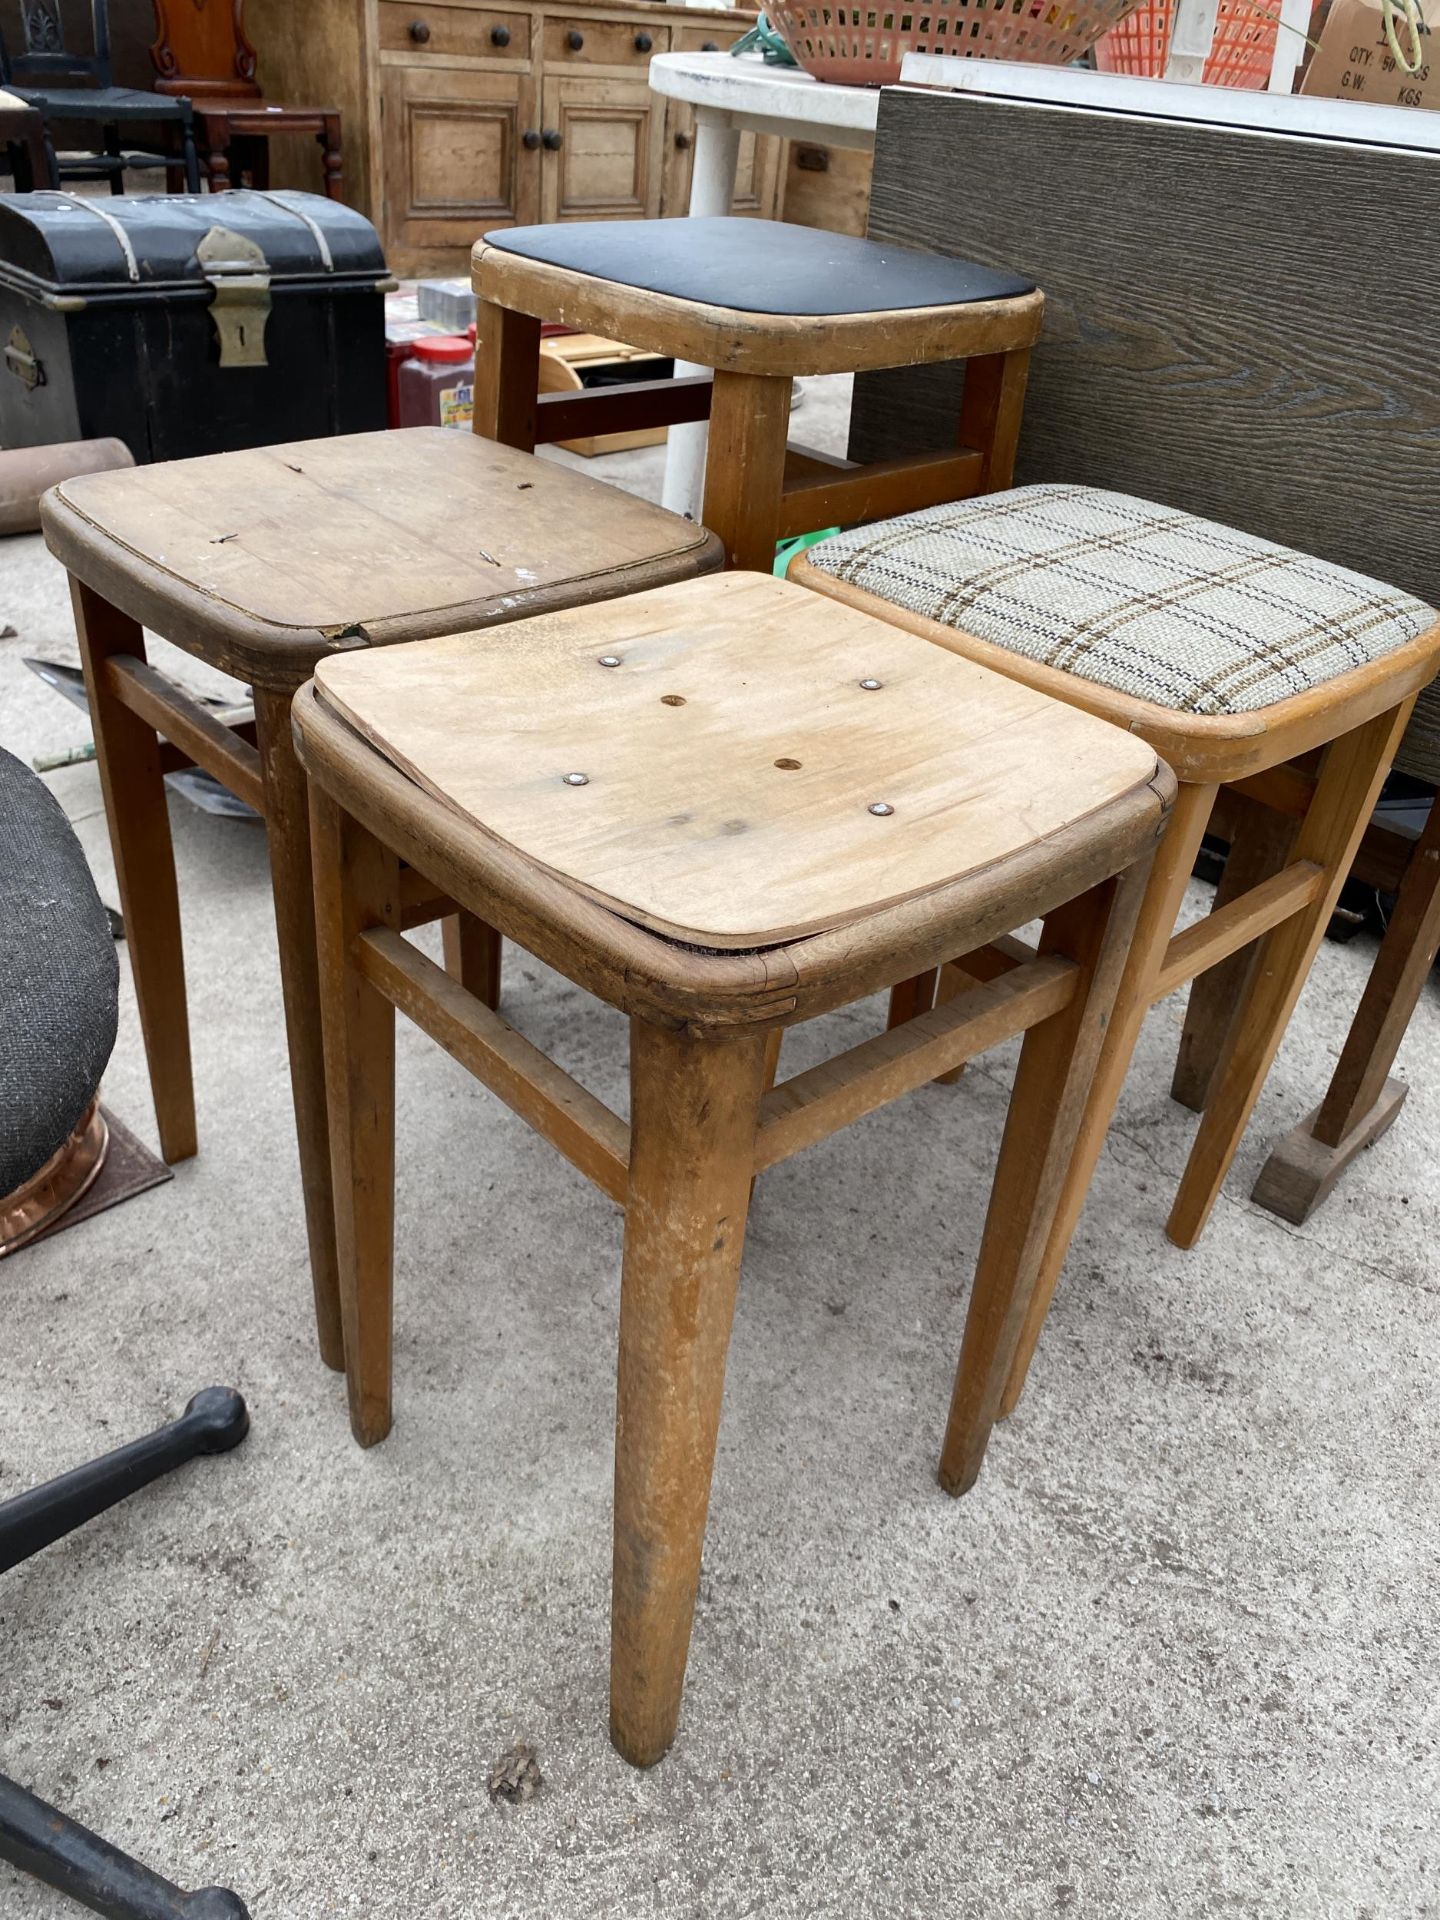 FOUR VARIOUS WOODEN STOOLS AND A FOLDING TABLE - Image 2 of 3